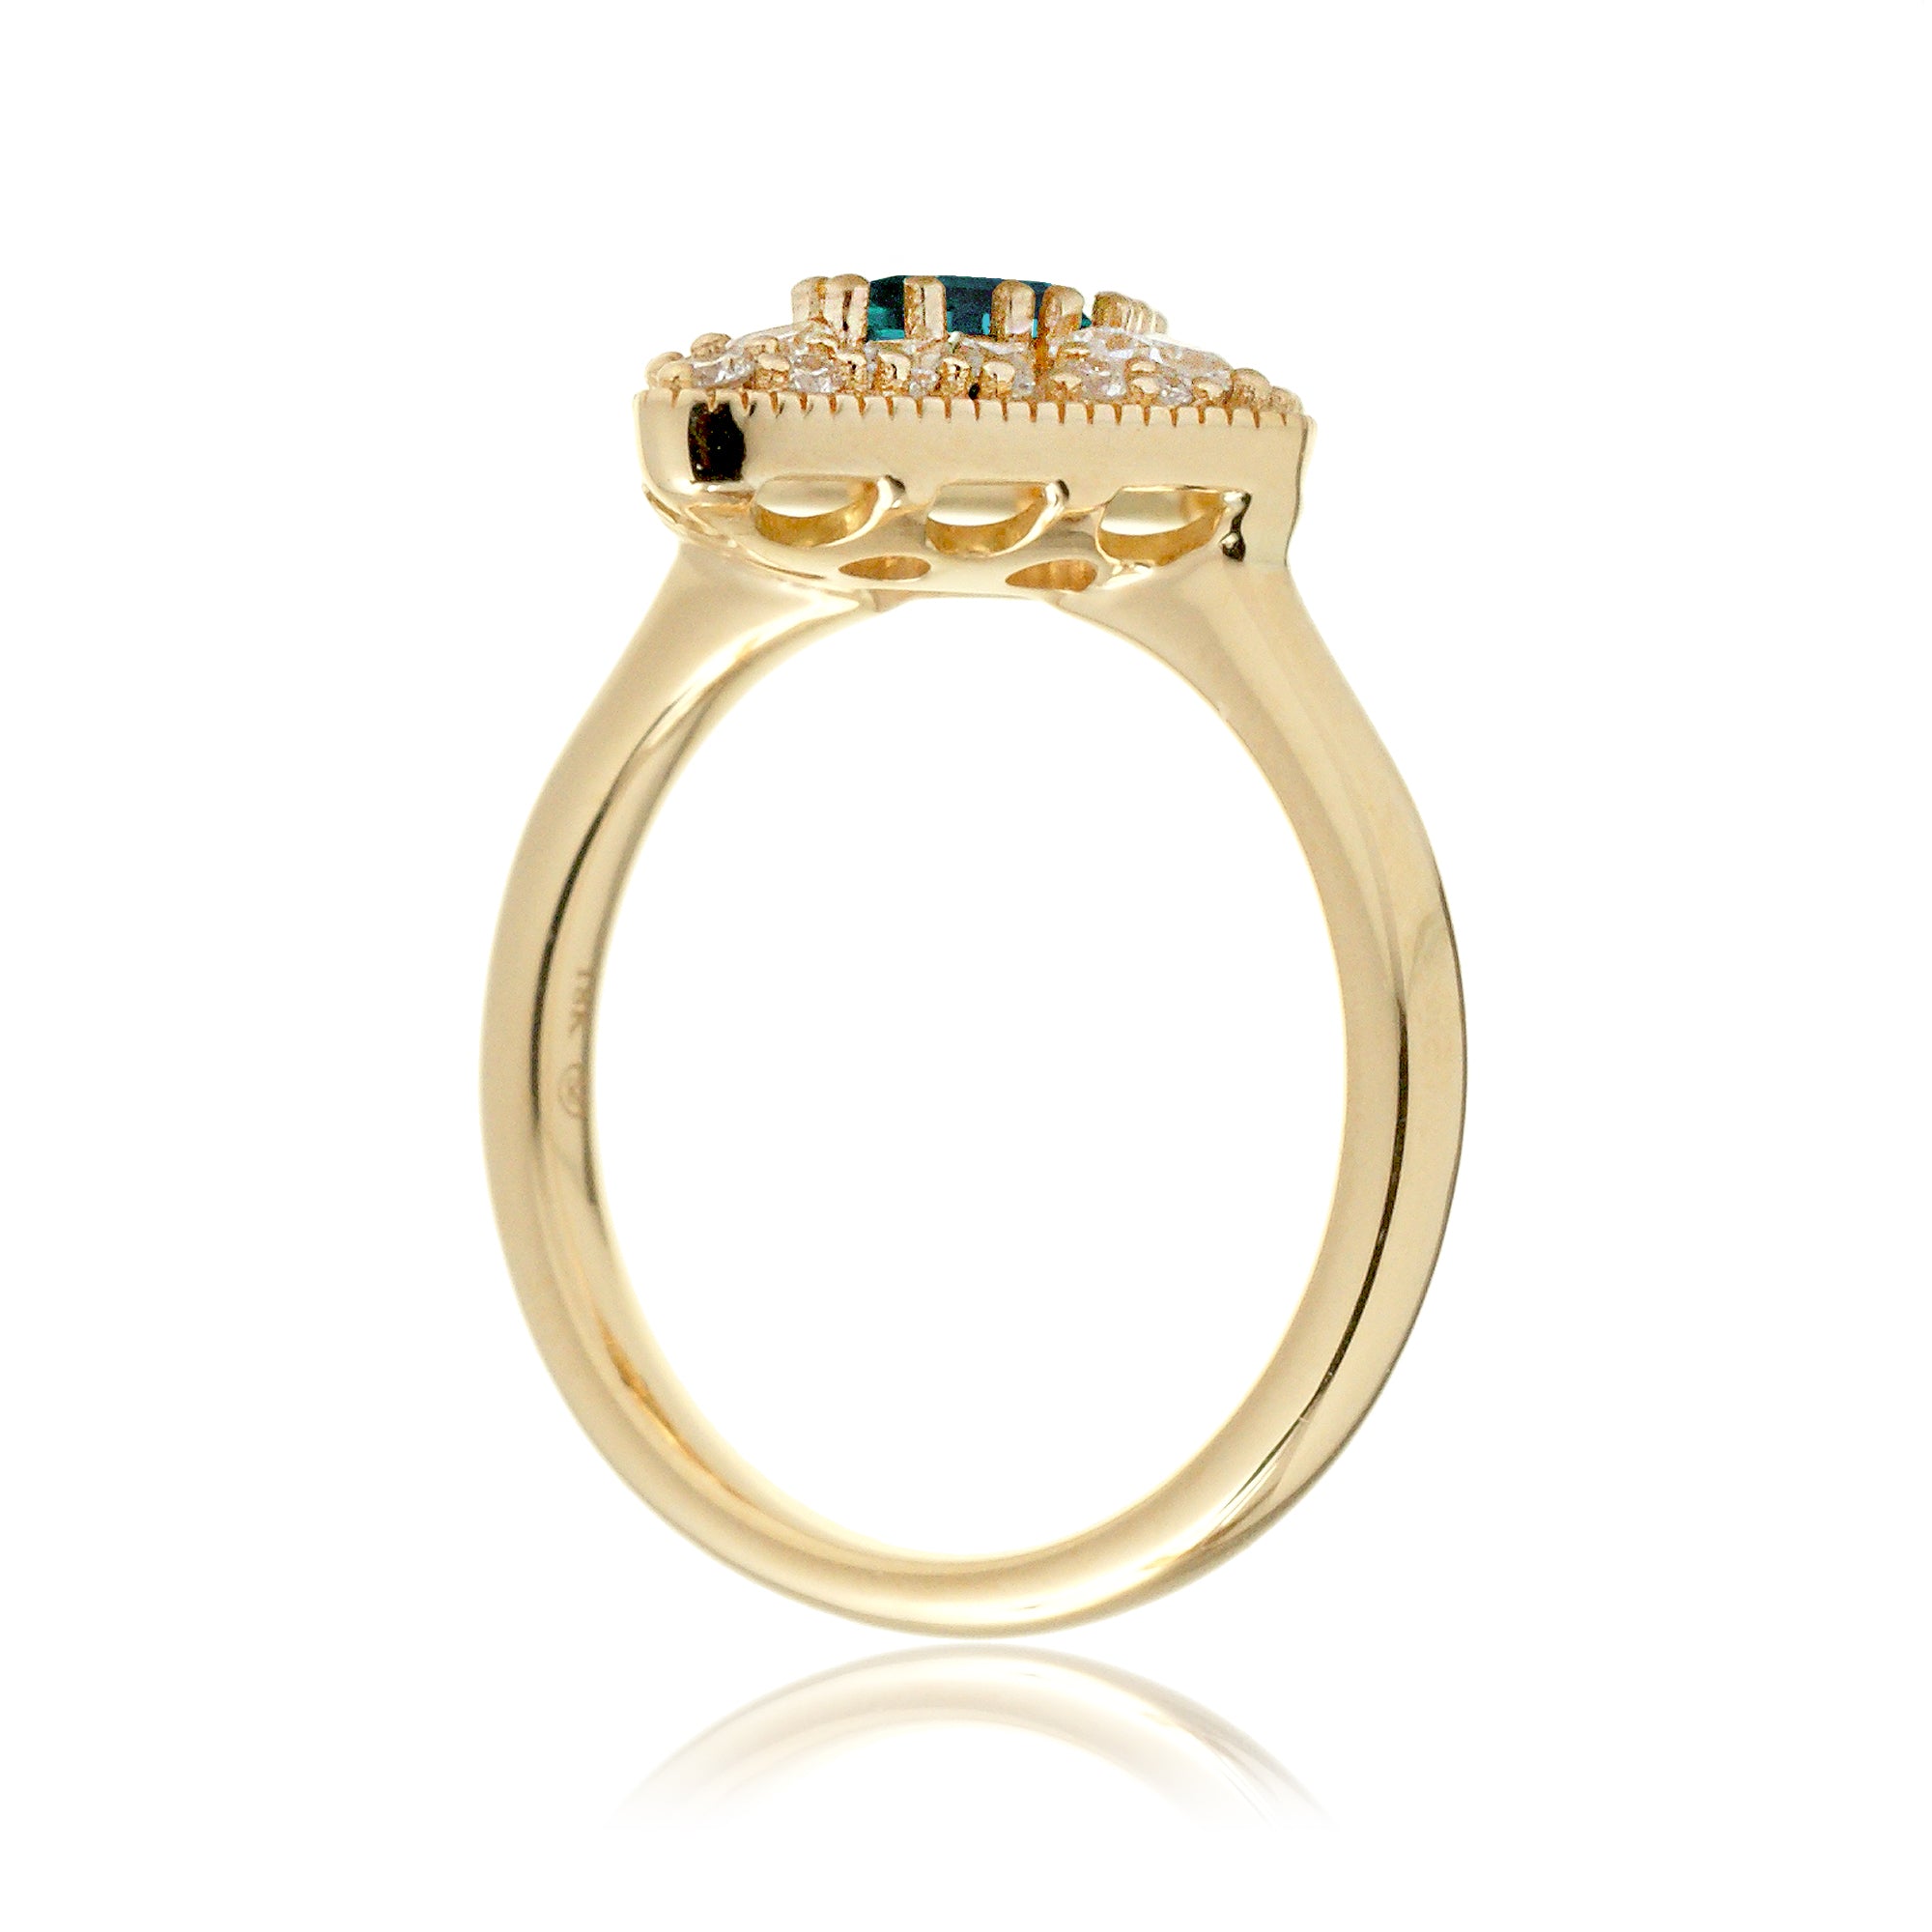 Kite cut green emerald and diamond vintage halo ring in yellow gold